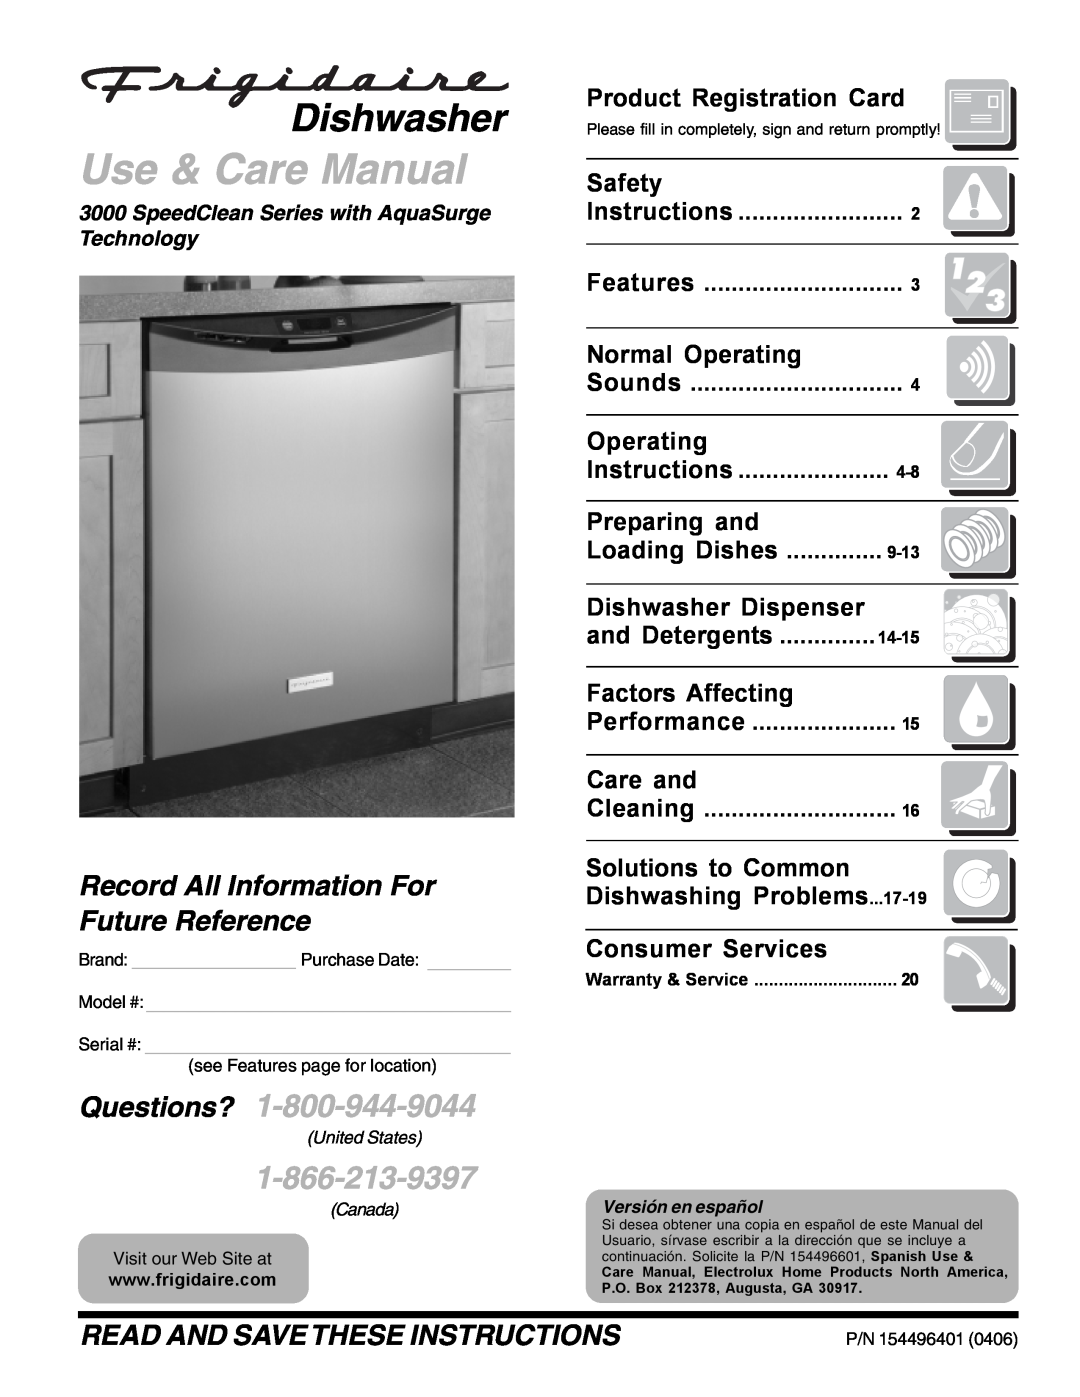 Frigidaire 3000 warranty Product Registration Card, Safety, Normal Operating, Preparing and, Loading Dishes, Care and 